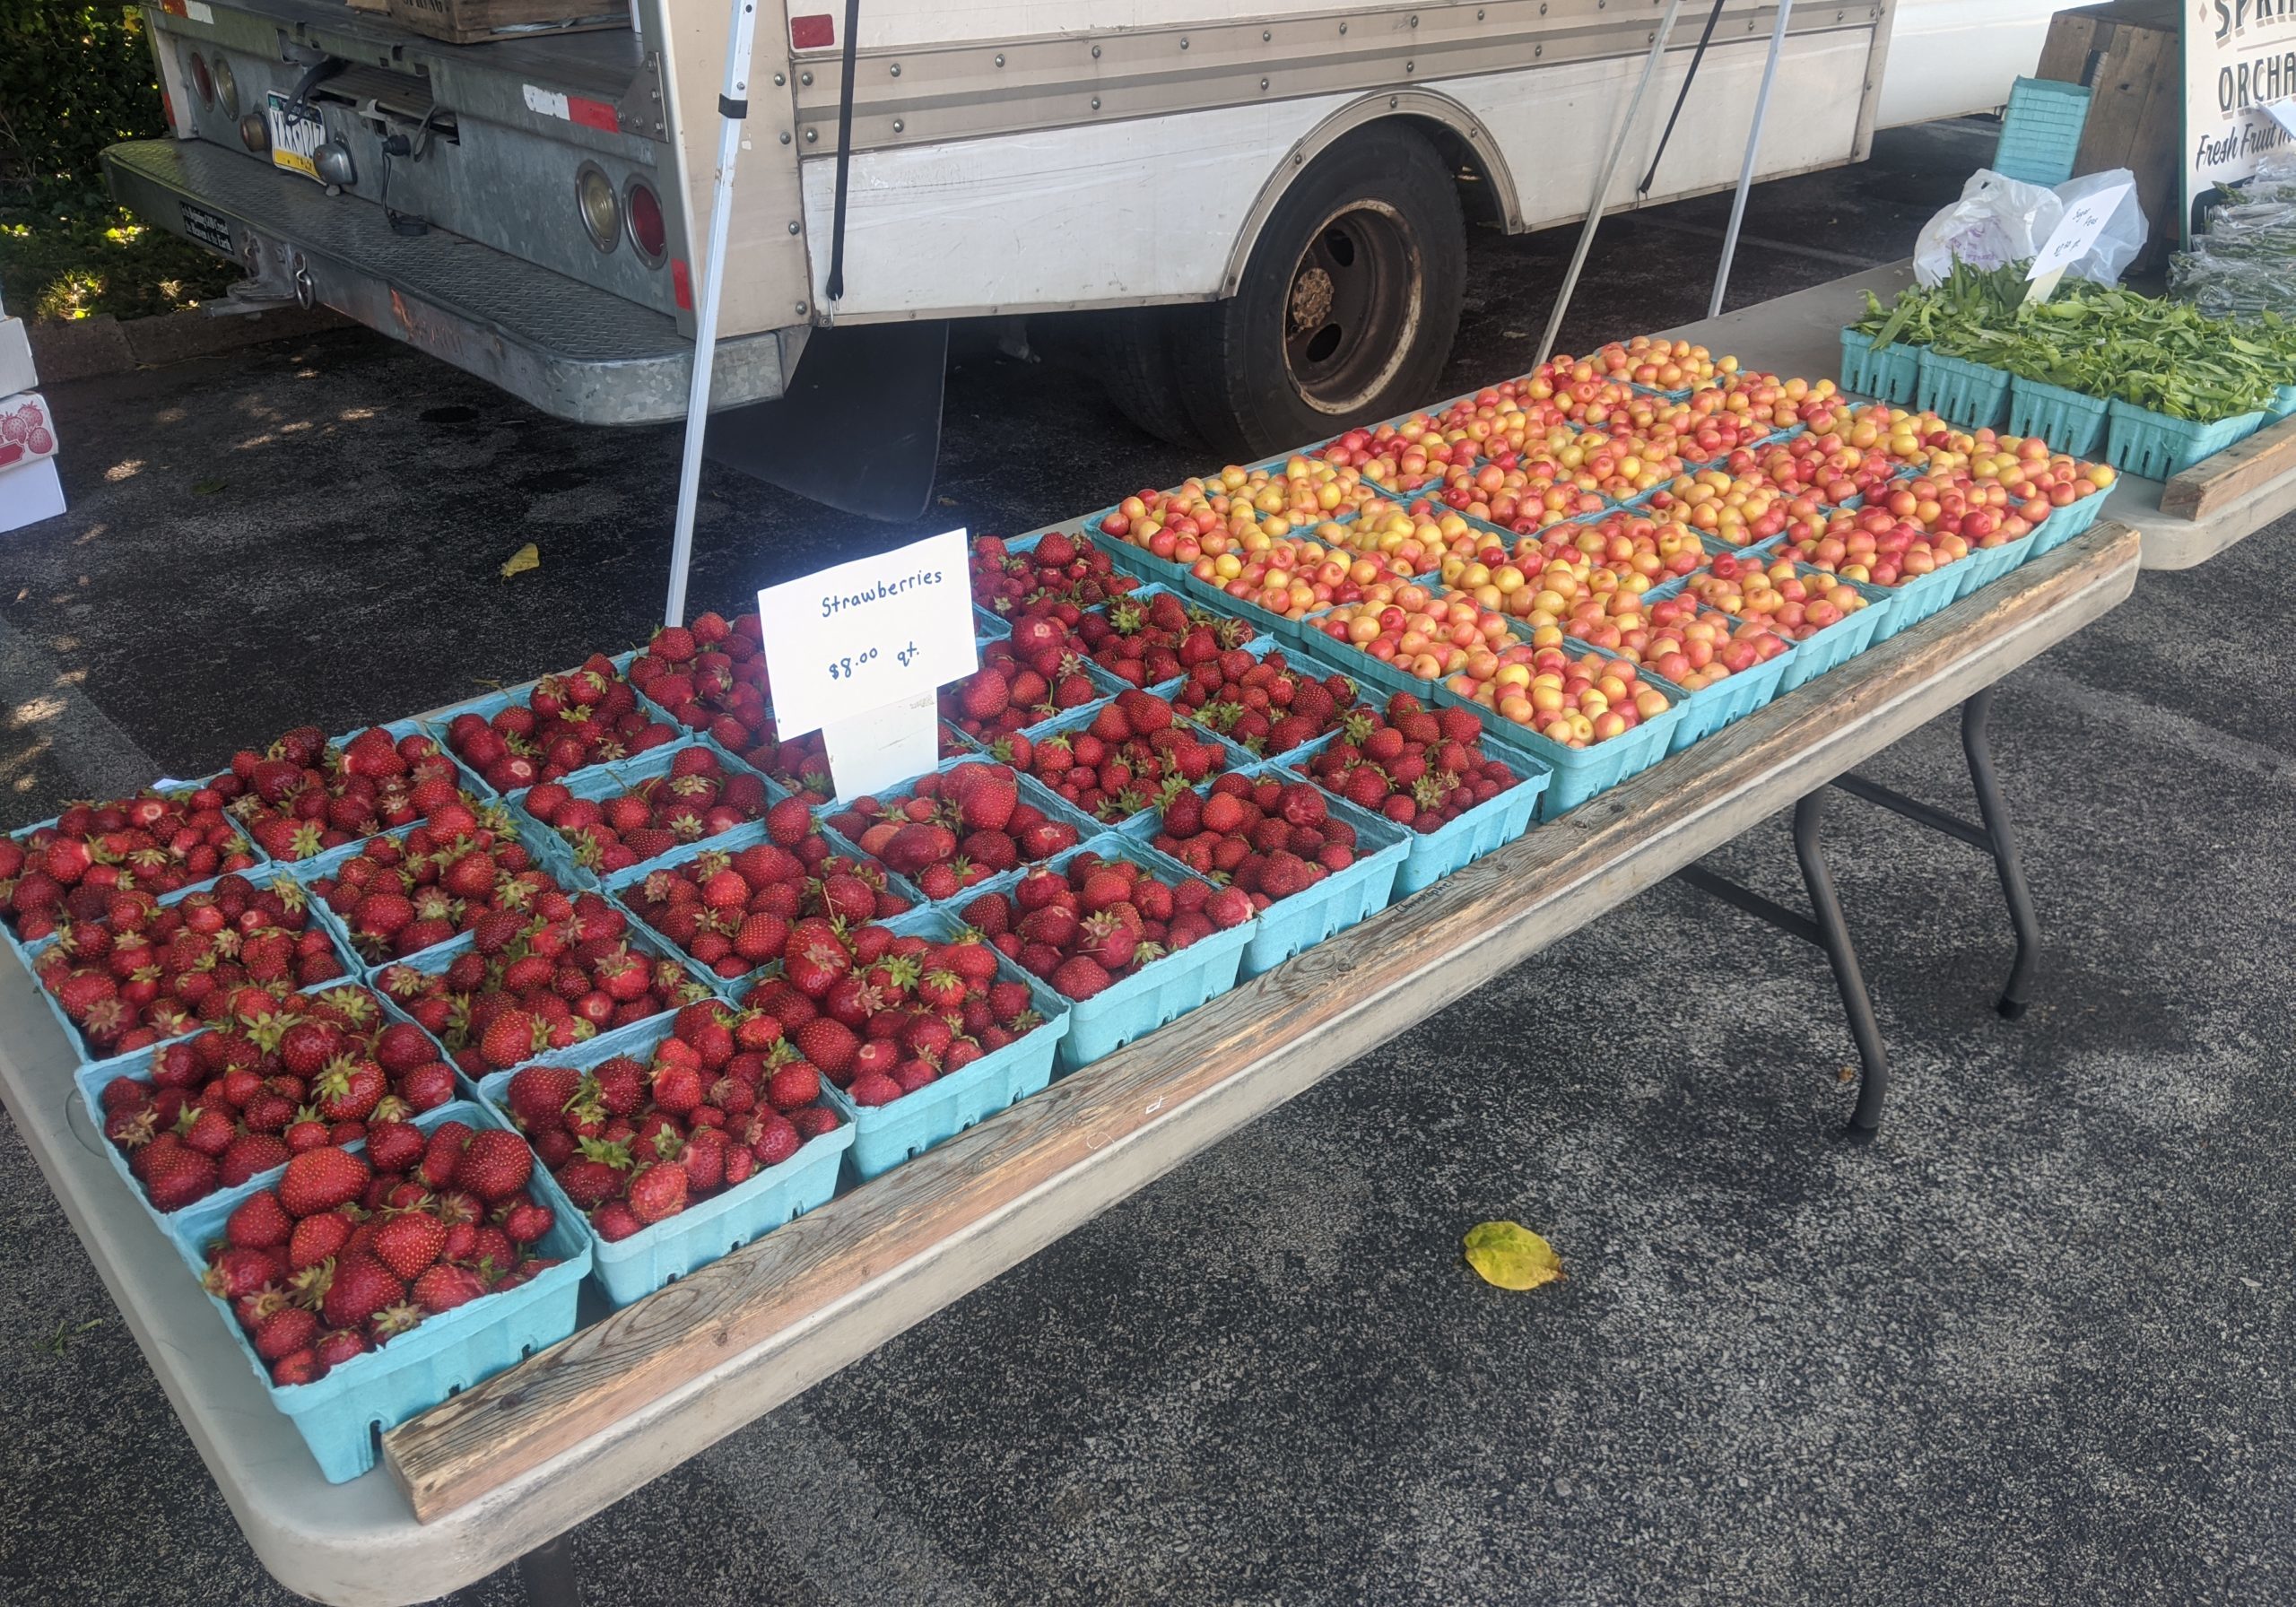 Fruit for sale at Overbrook Farmers Market